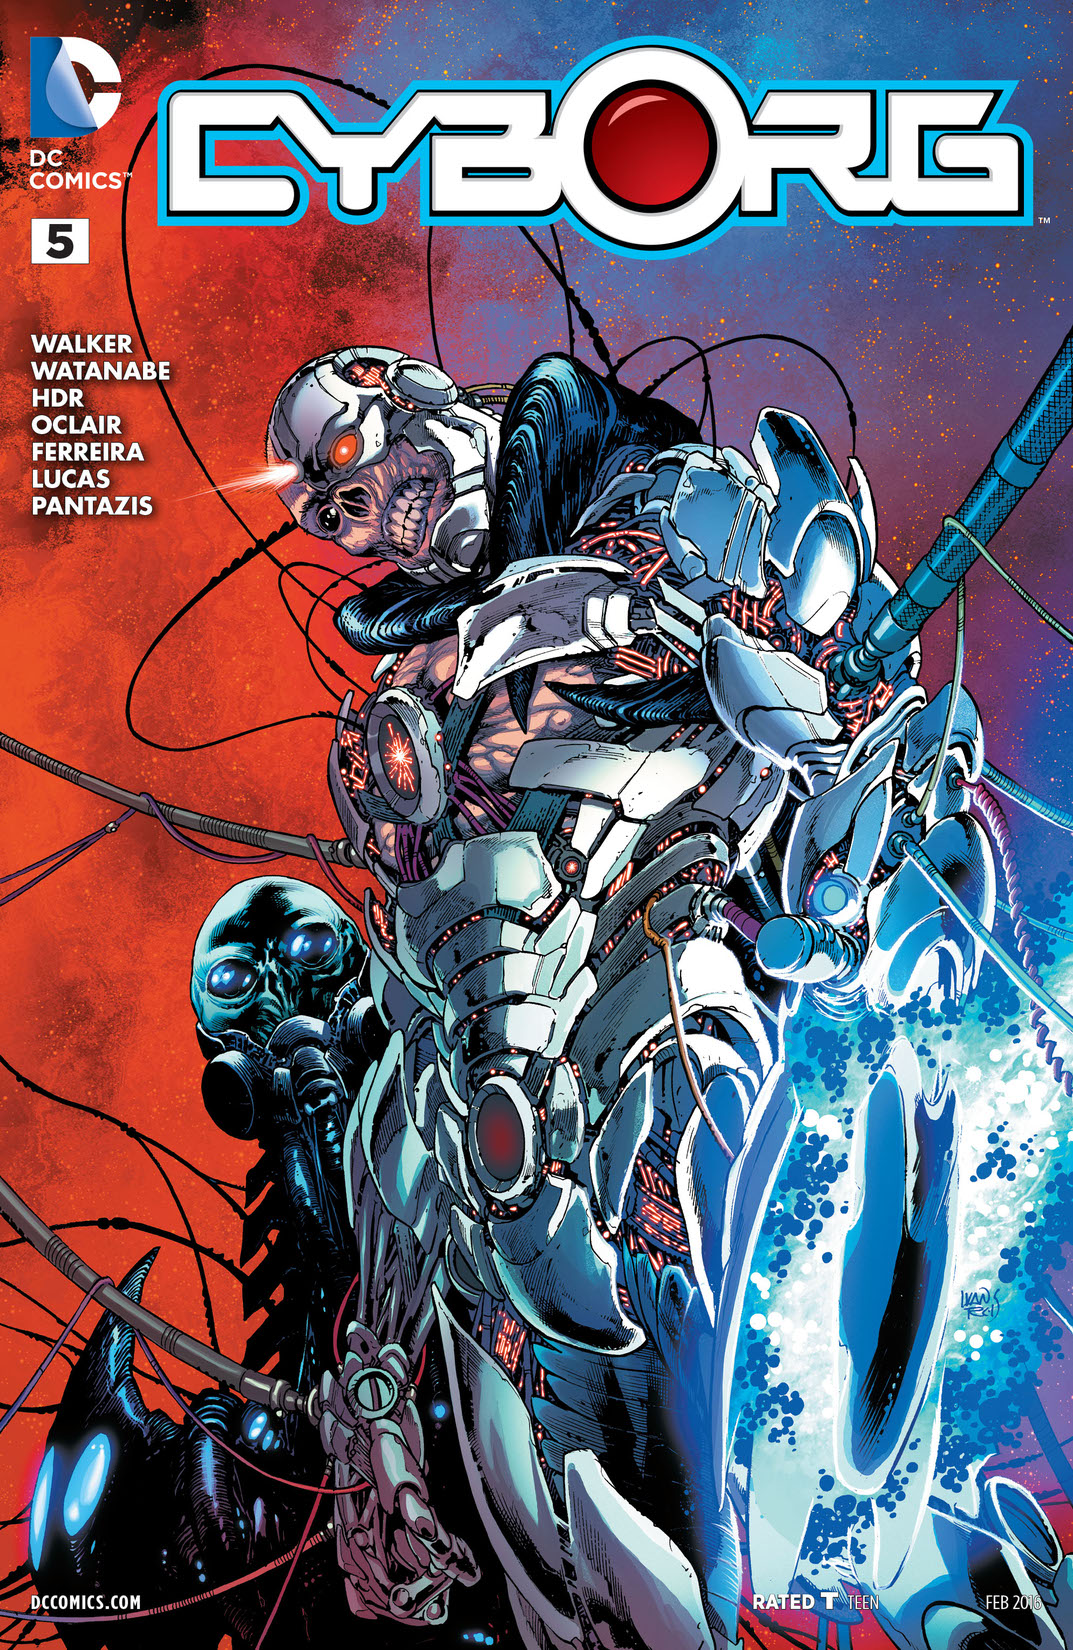 Cyborg (2015-) #5 preview images